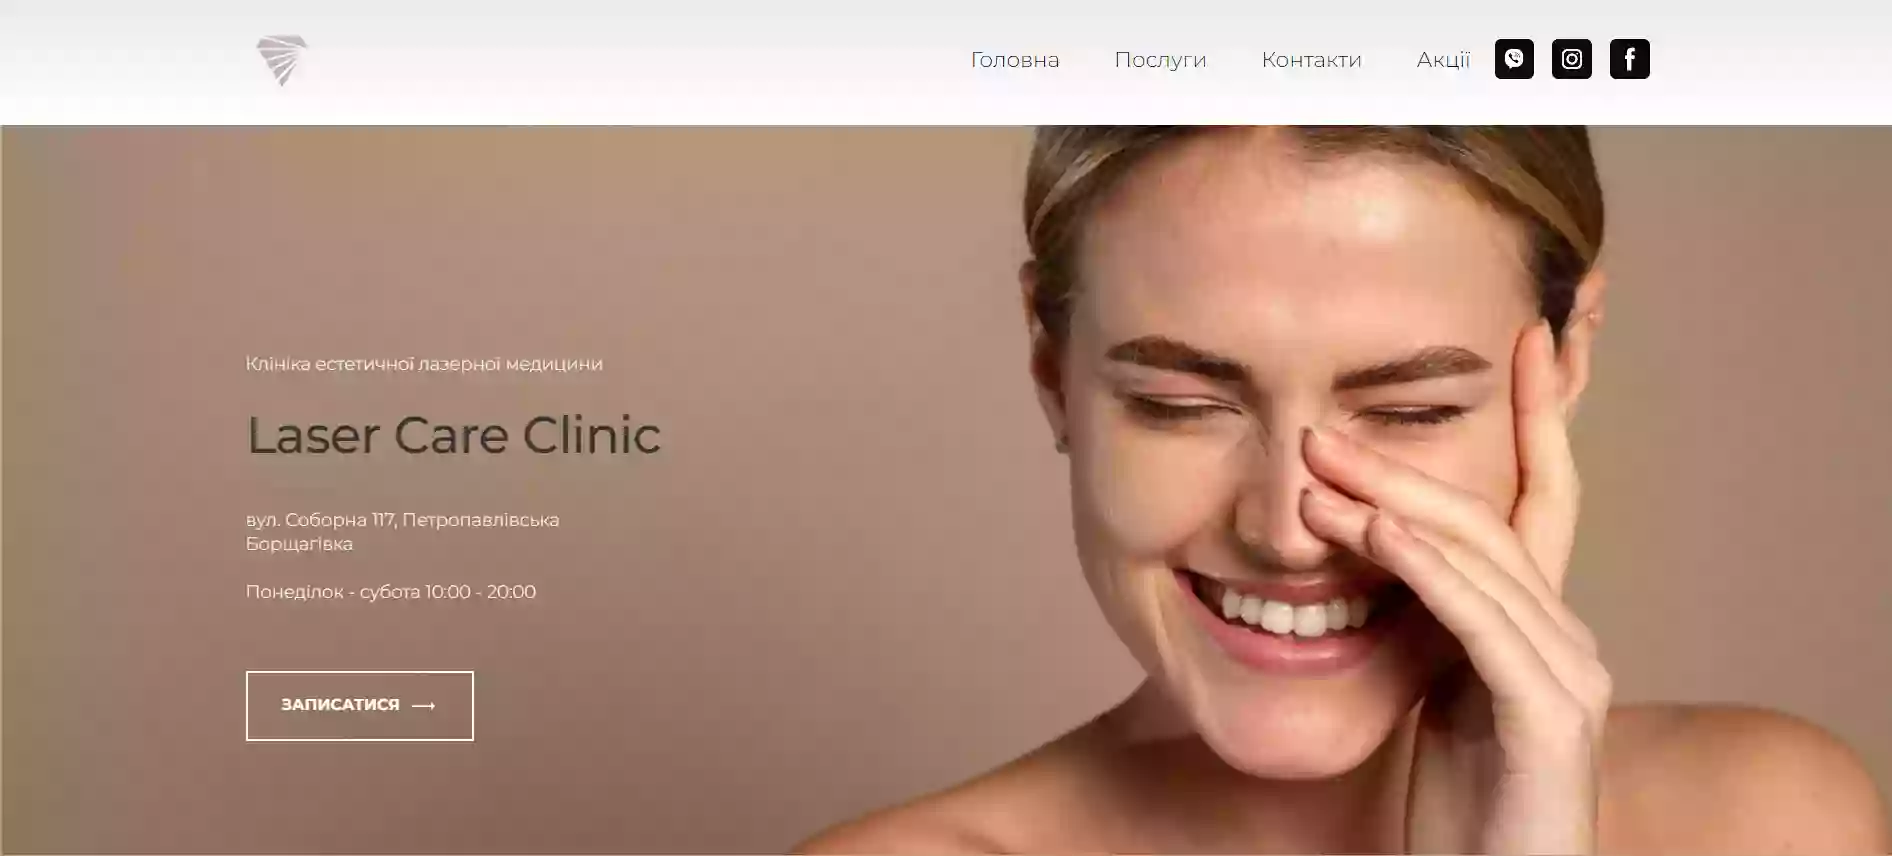 Laser Care Clinic